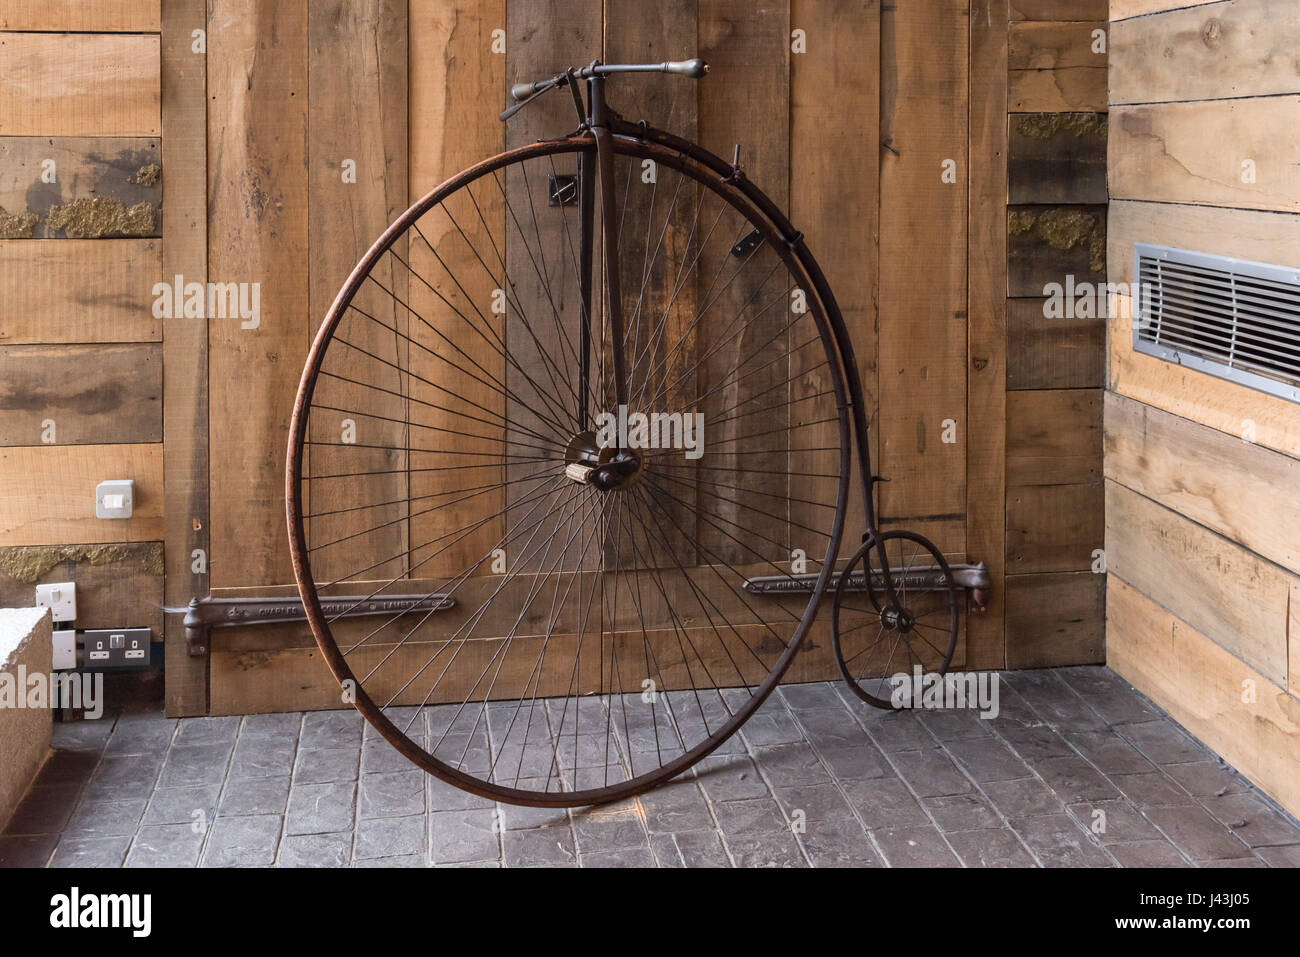 Penny Farthing, location, Museum of London, UK Banque D'Images